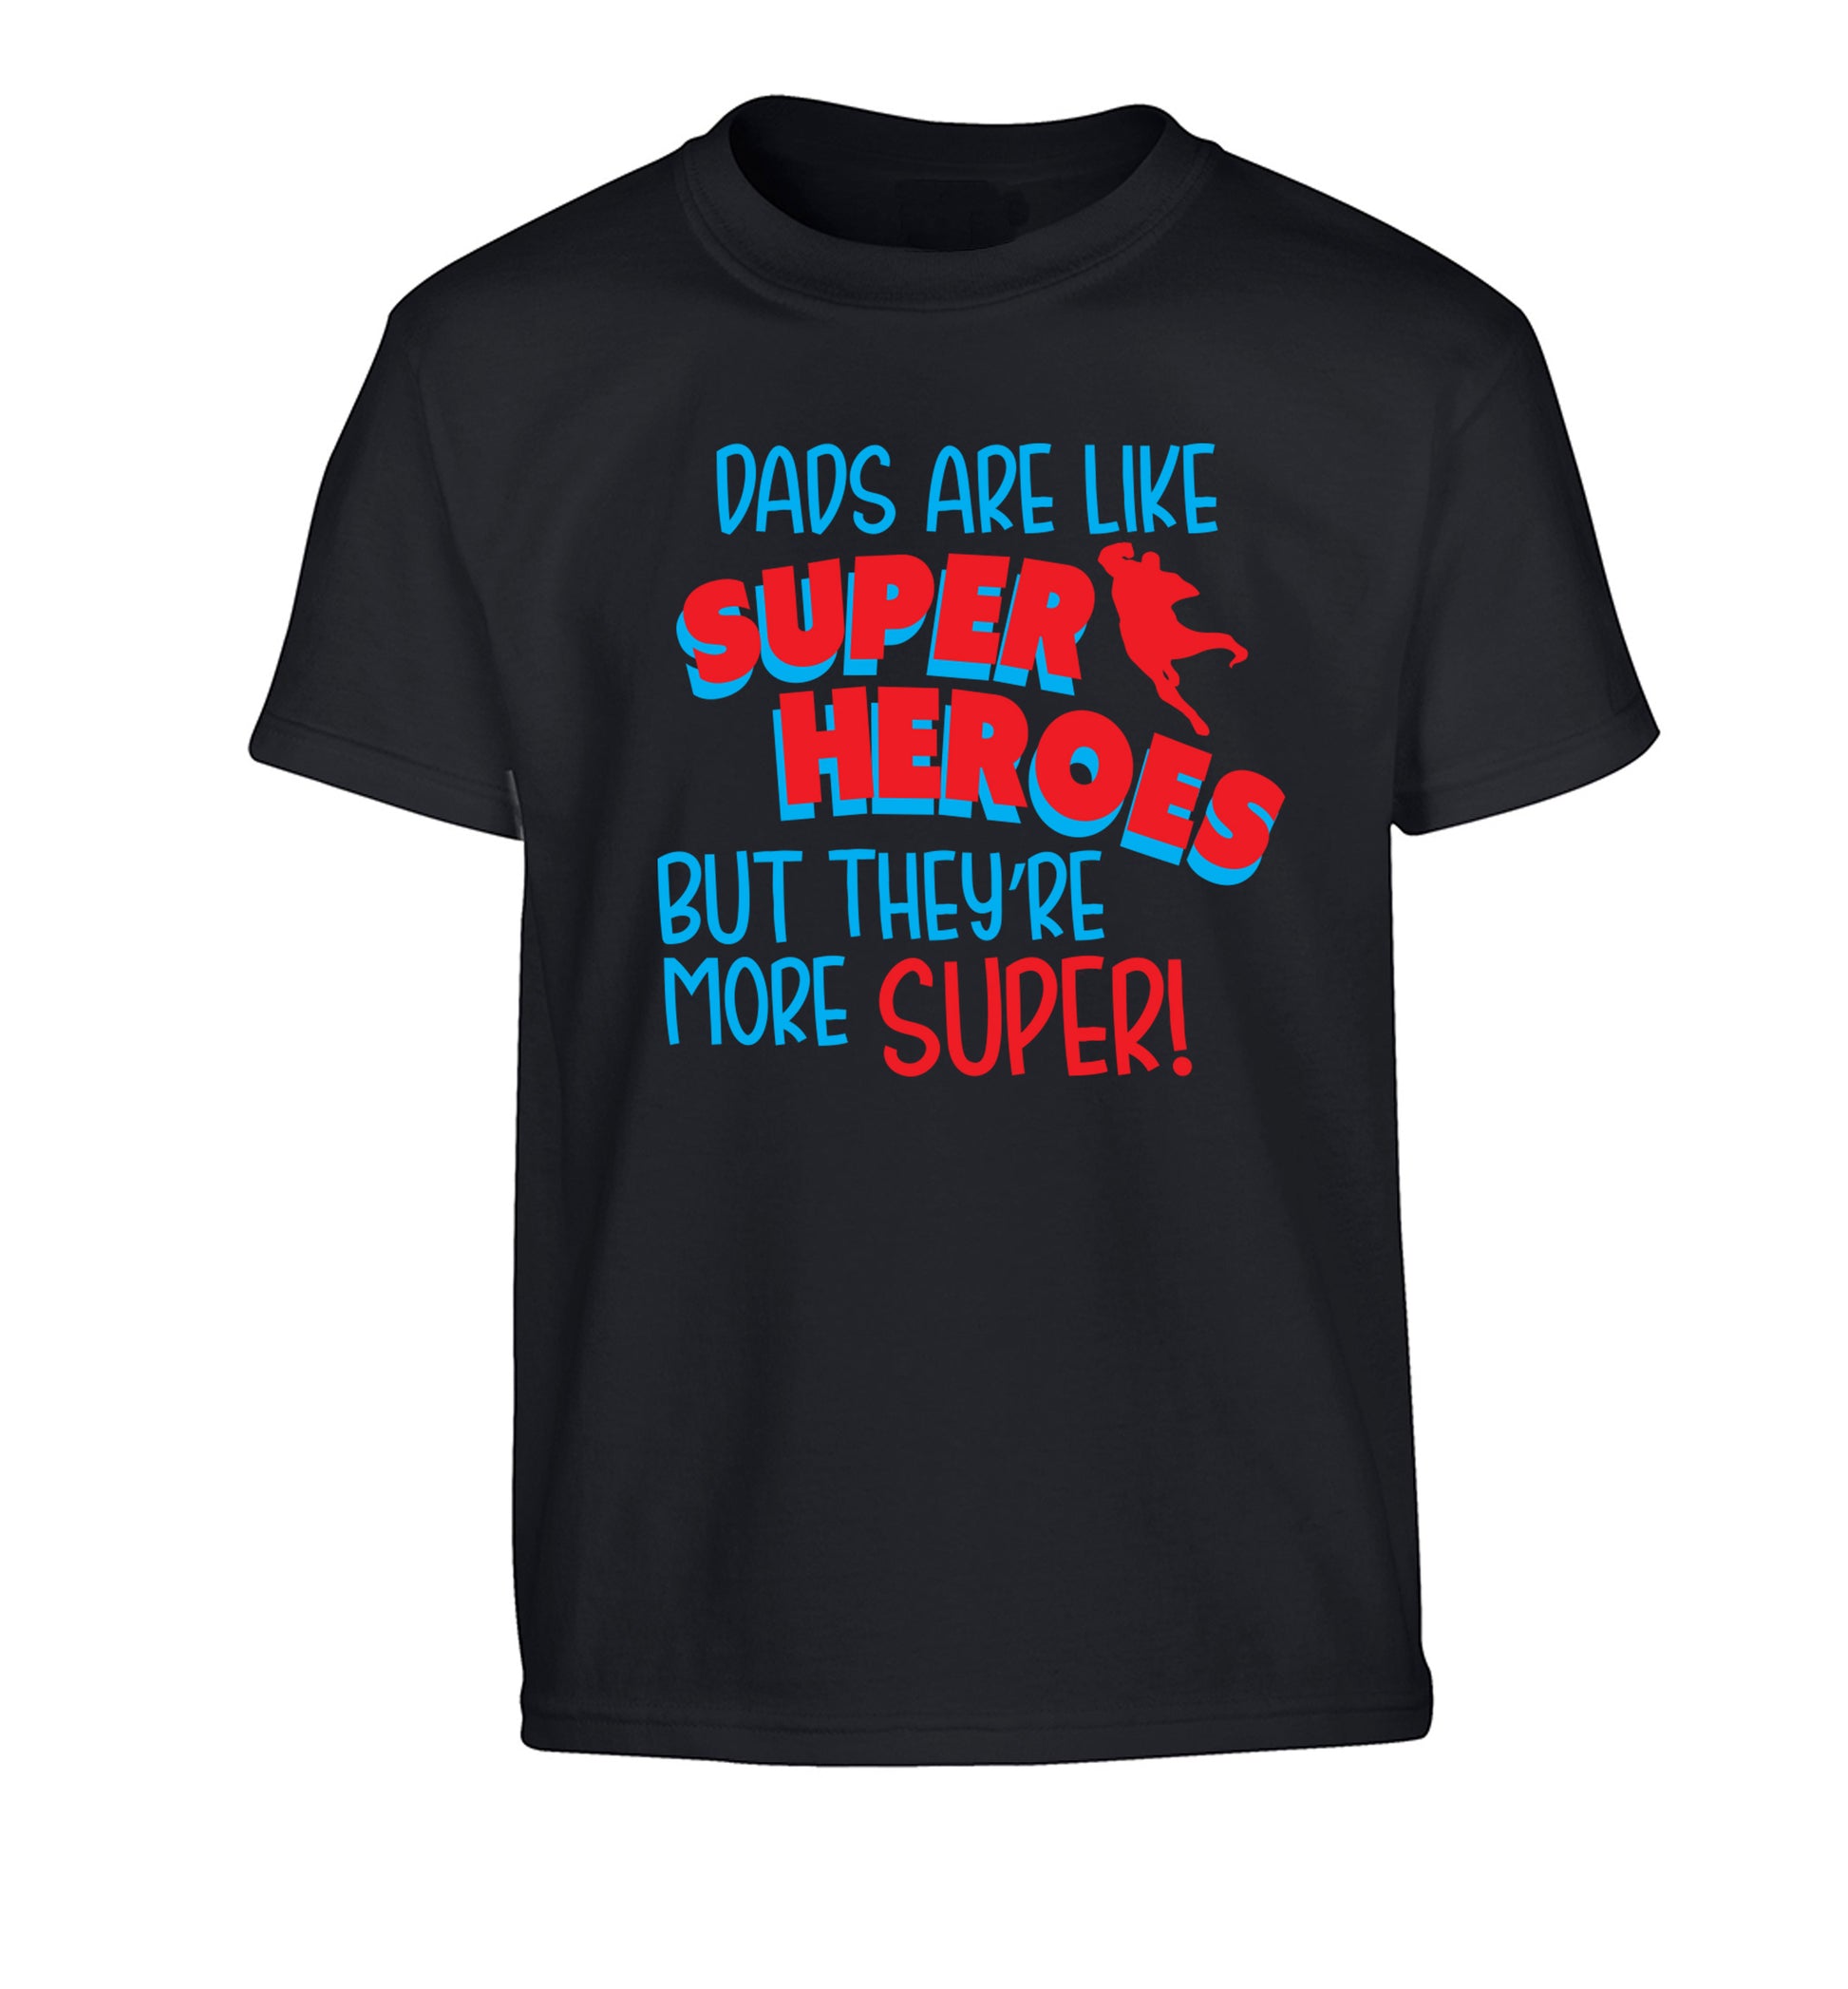 Dads are like superheros but they're more super Children's black Tshirt 12-13 Years